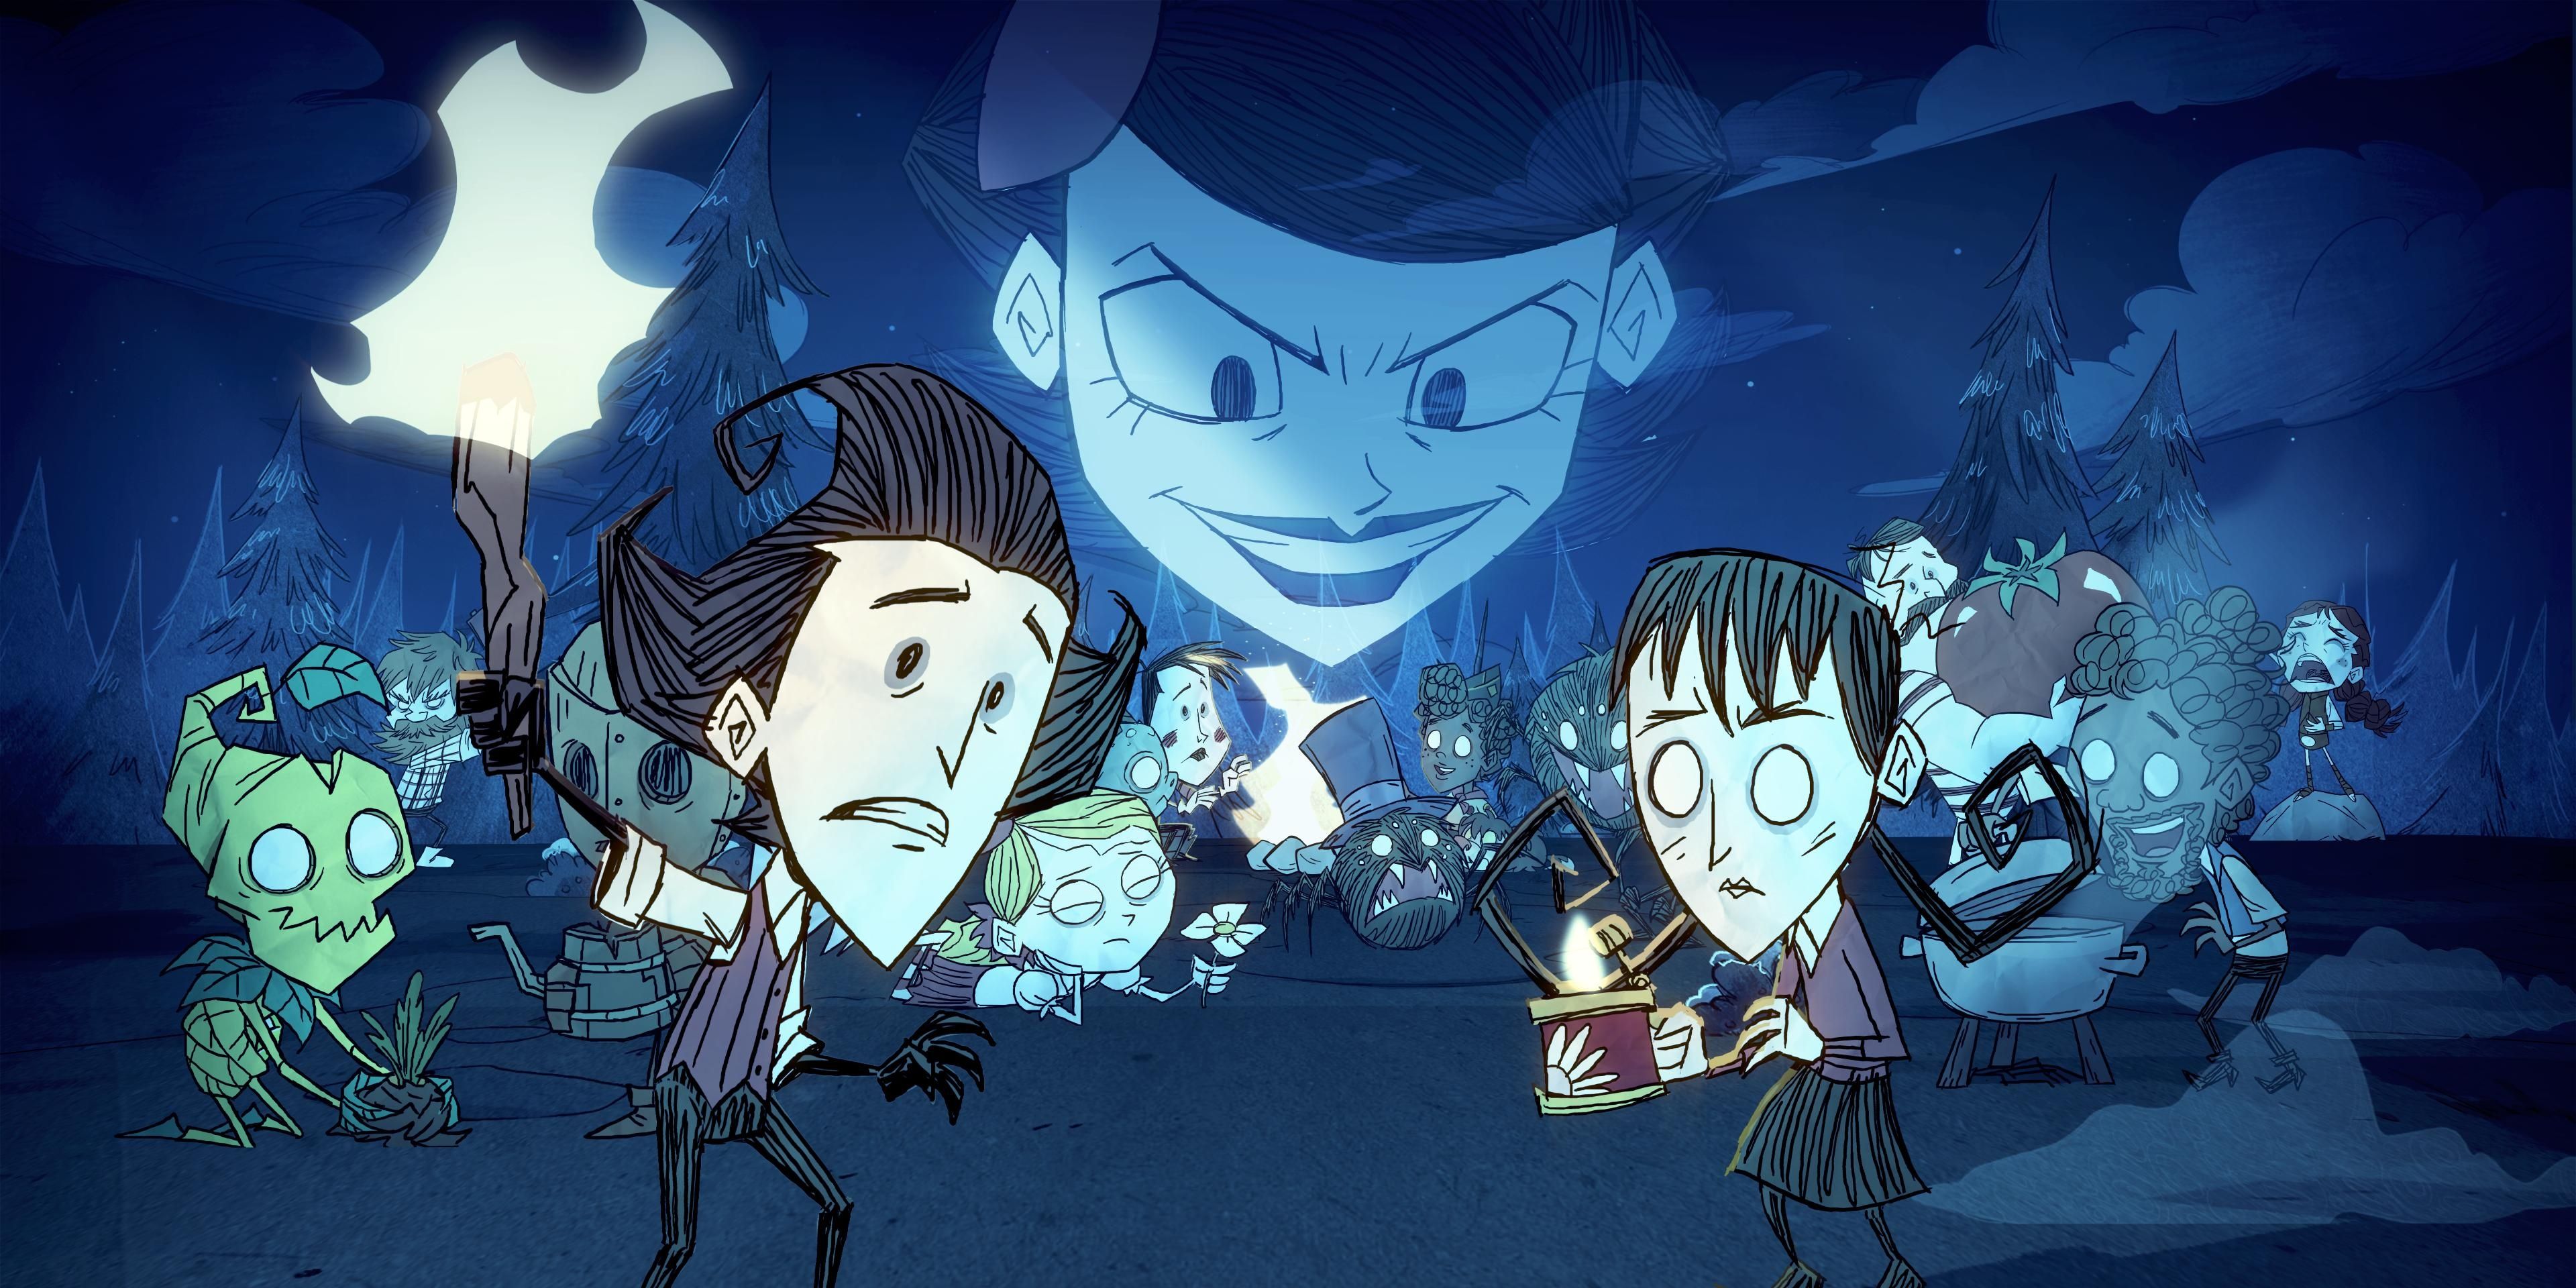 Wilson and Willow from Don't Starve Together look scared as a large face hovers above them